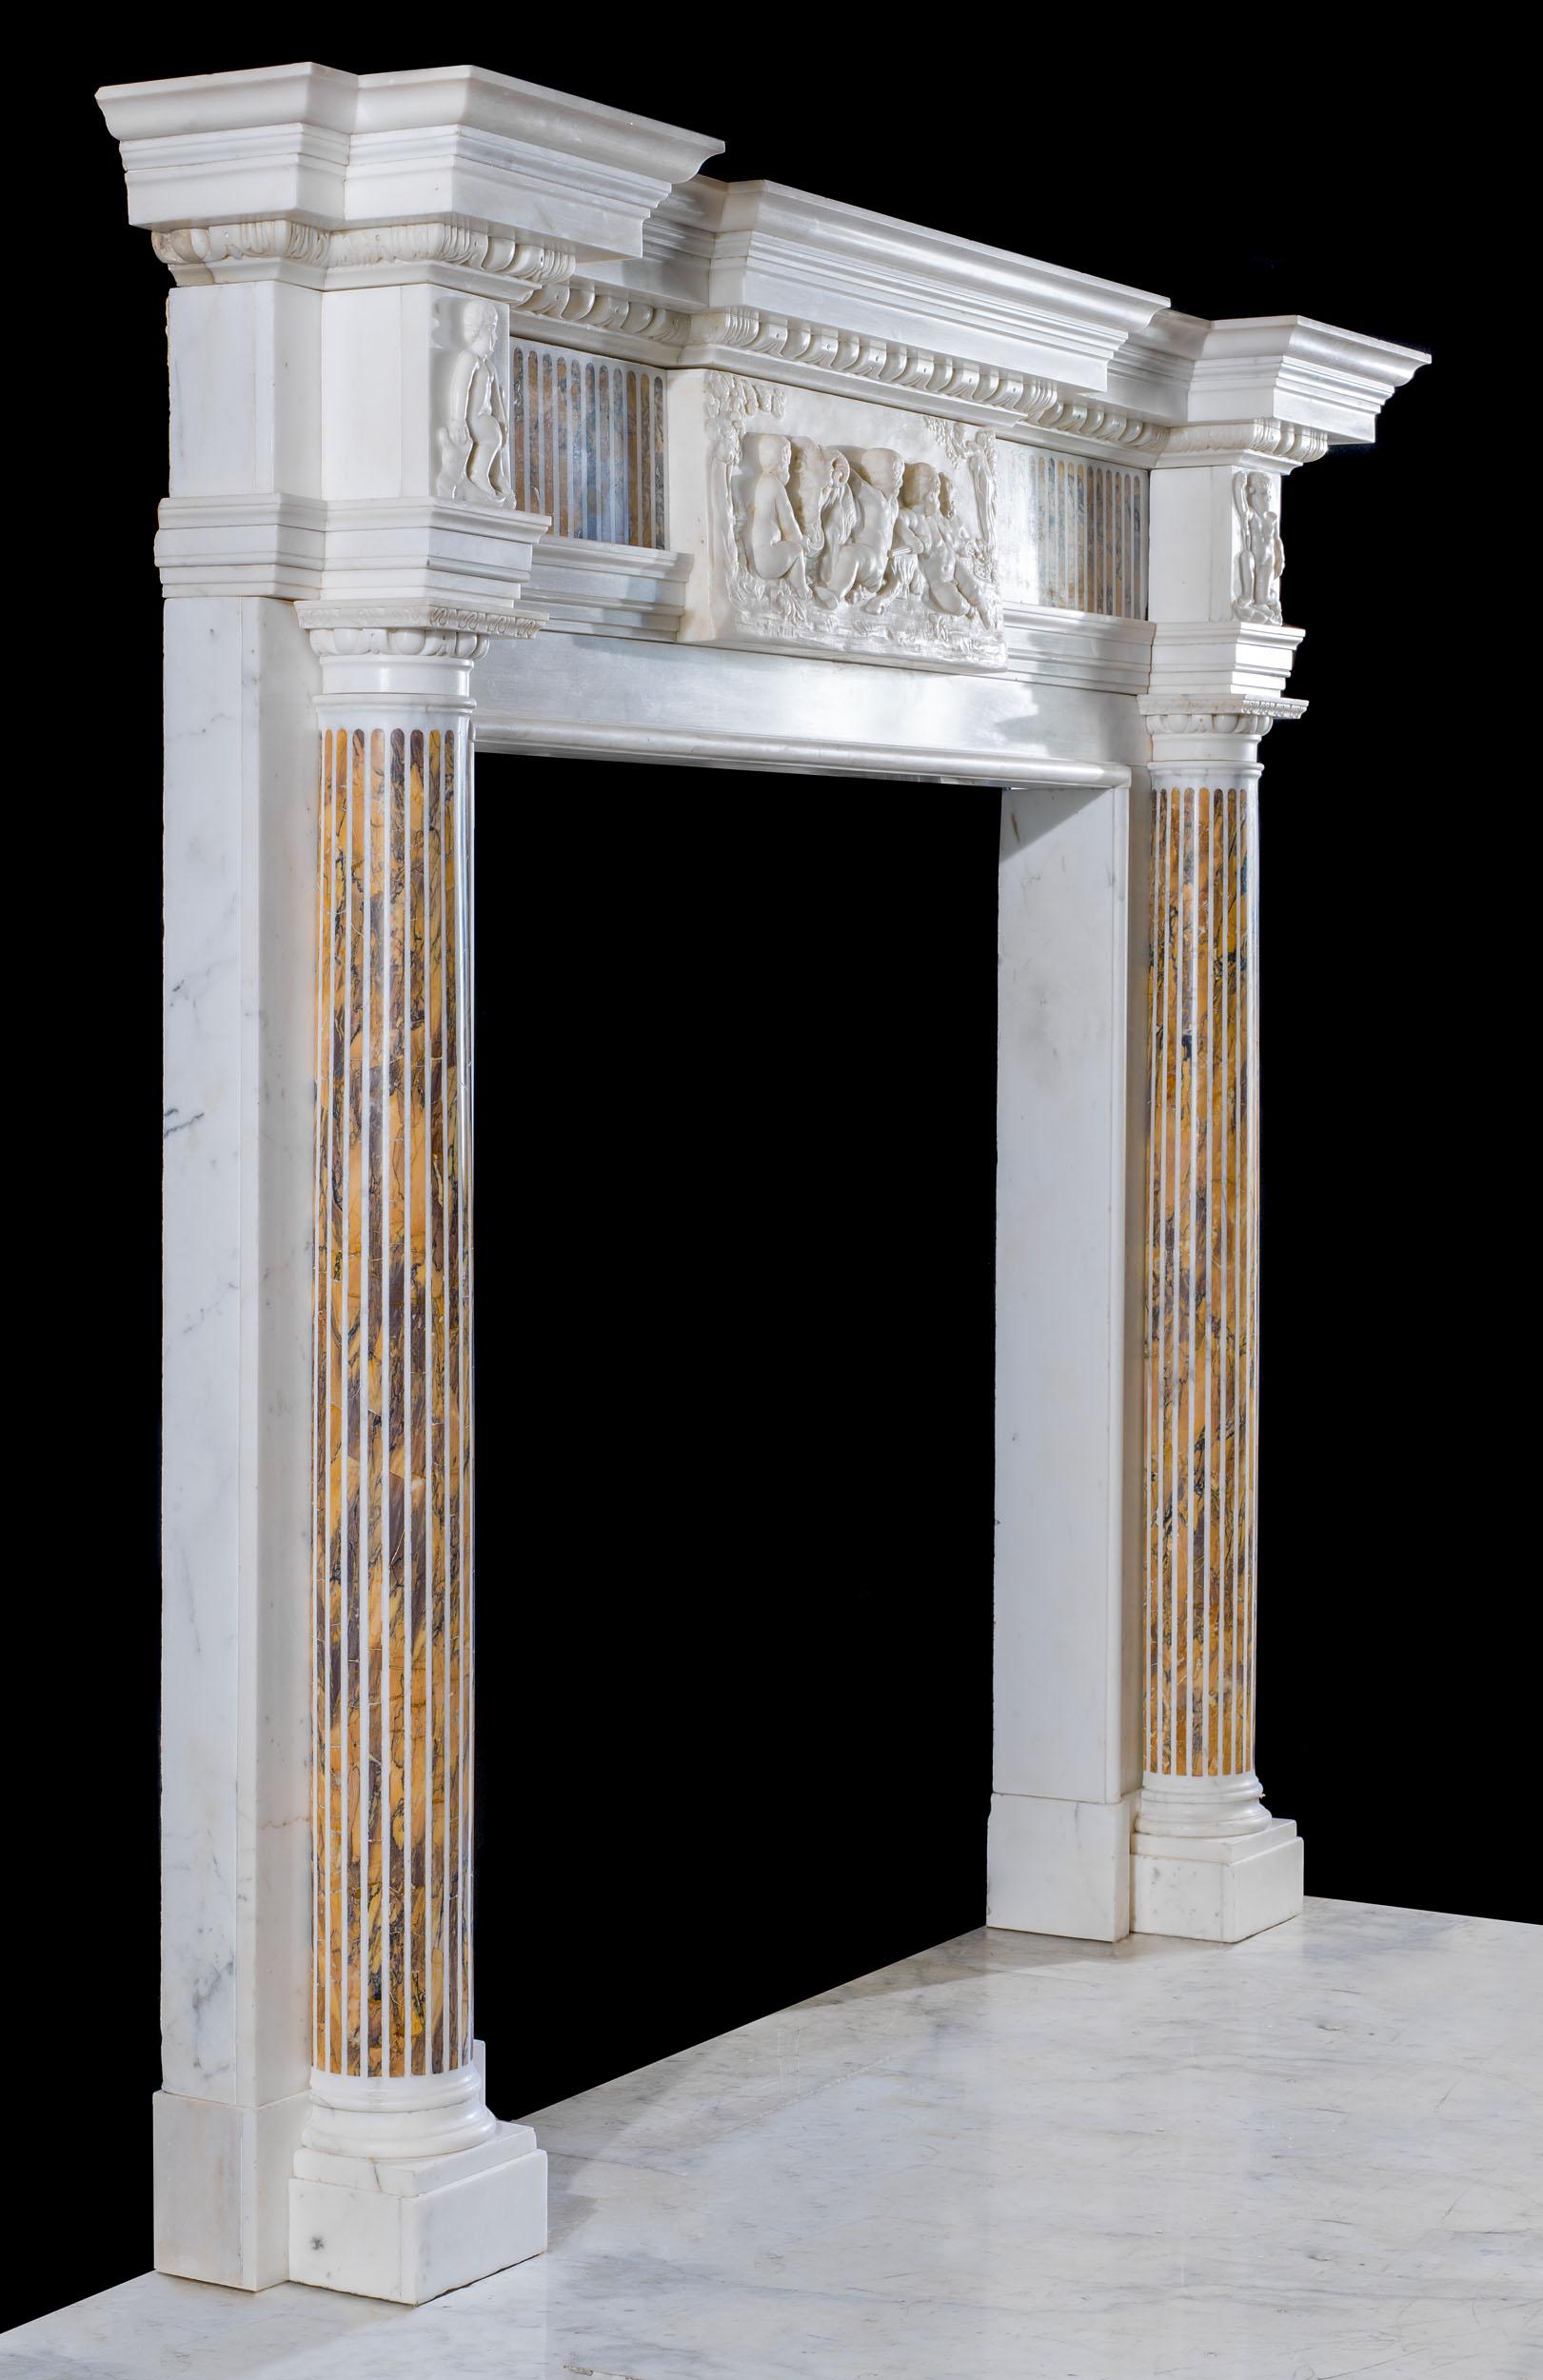 A fine and grand neoclassical chimneypiece in statuary marble with Siena marble inlay. The boldly carved breakfront shelf sits above a high relief egg and dart undershelf and a finely fluted frieze inlaid with Siena marble. This is mounted with a